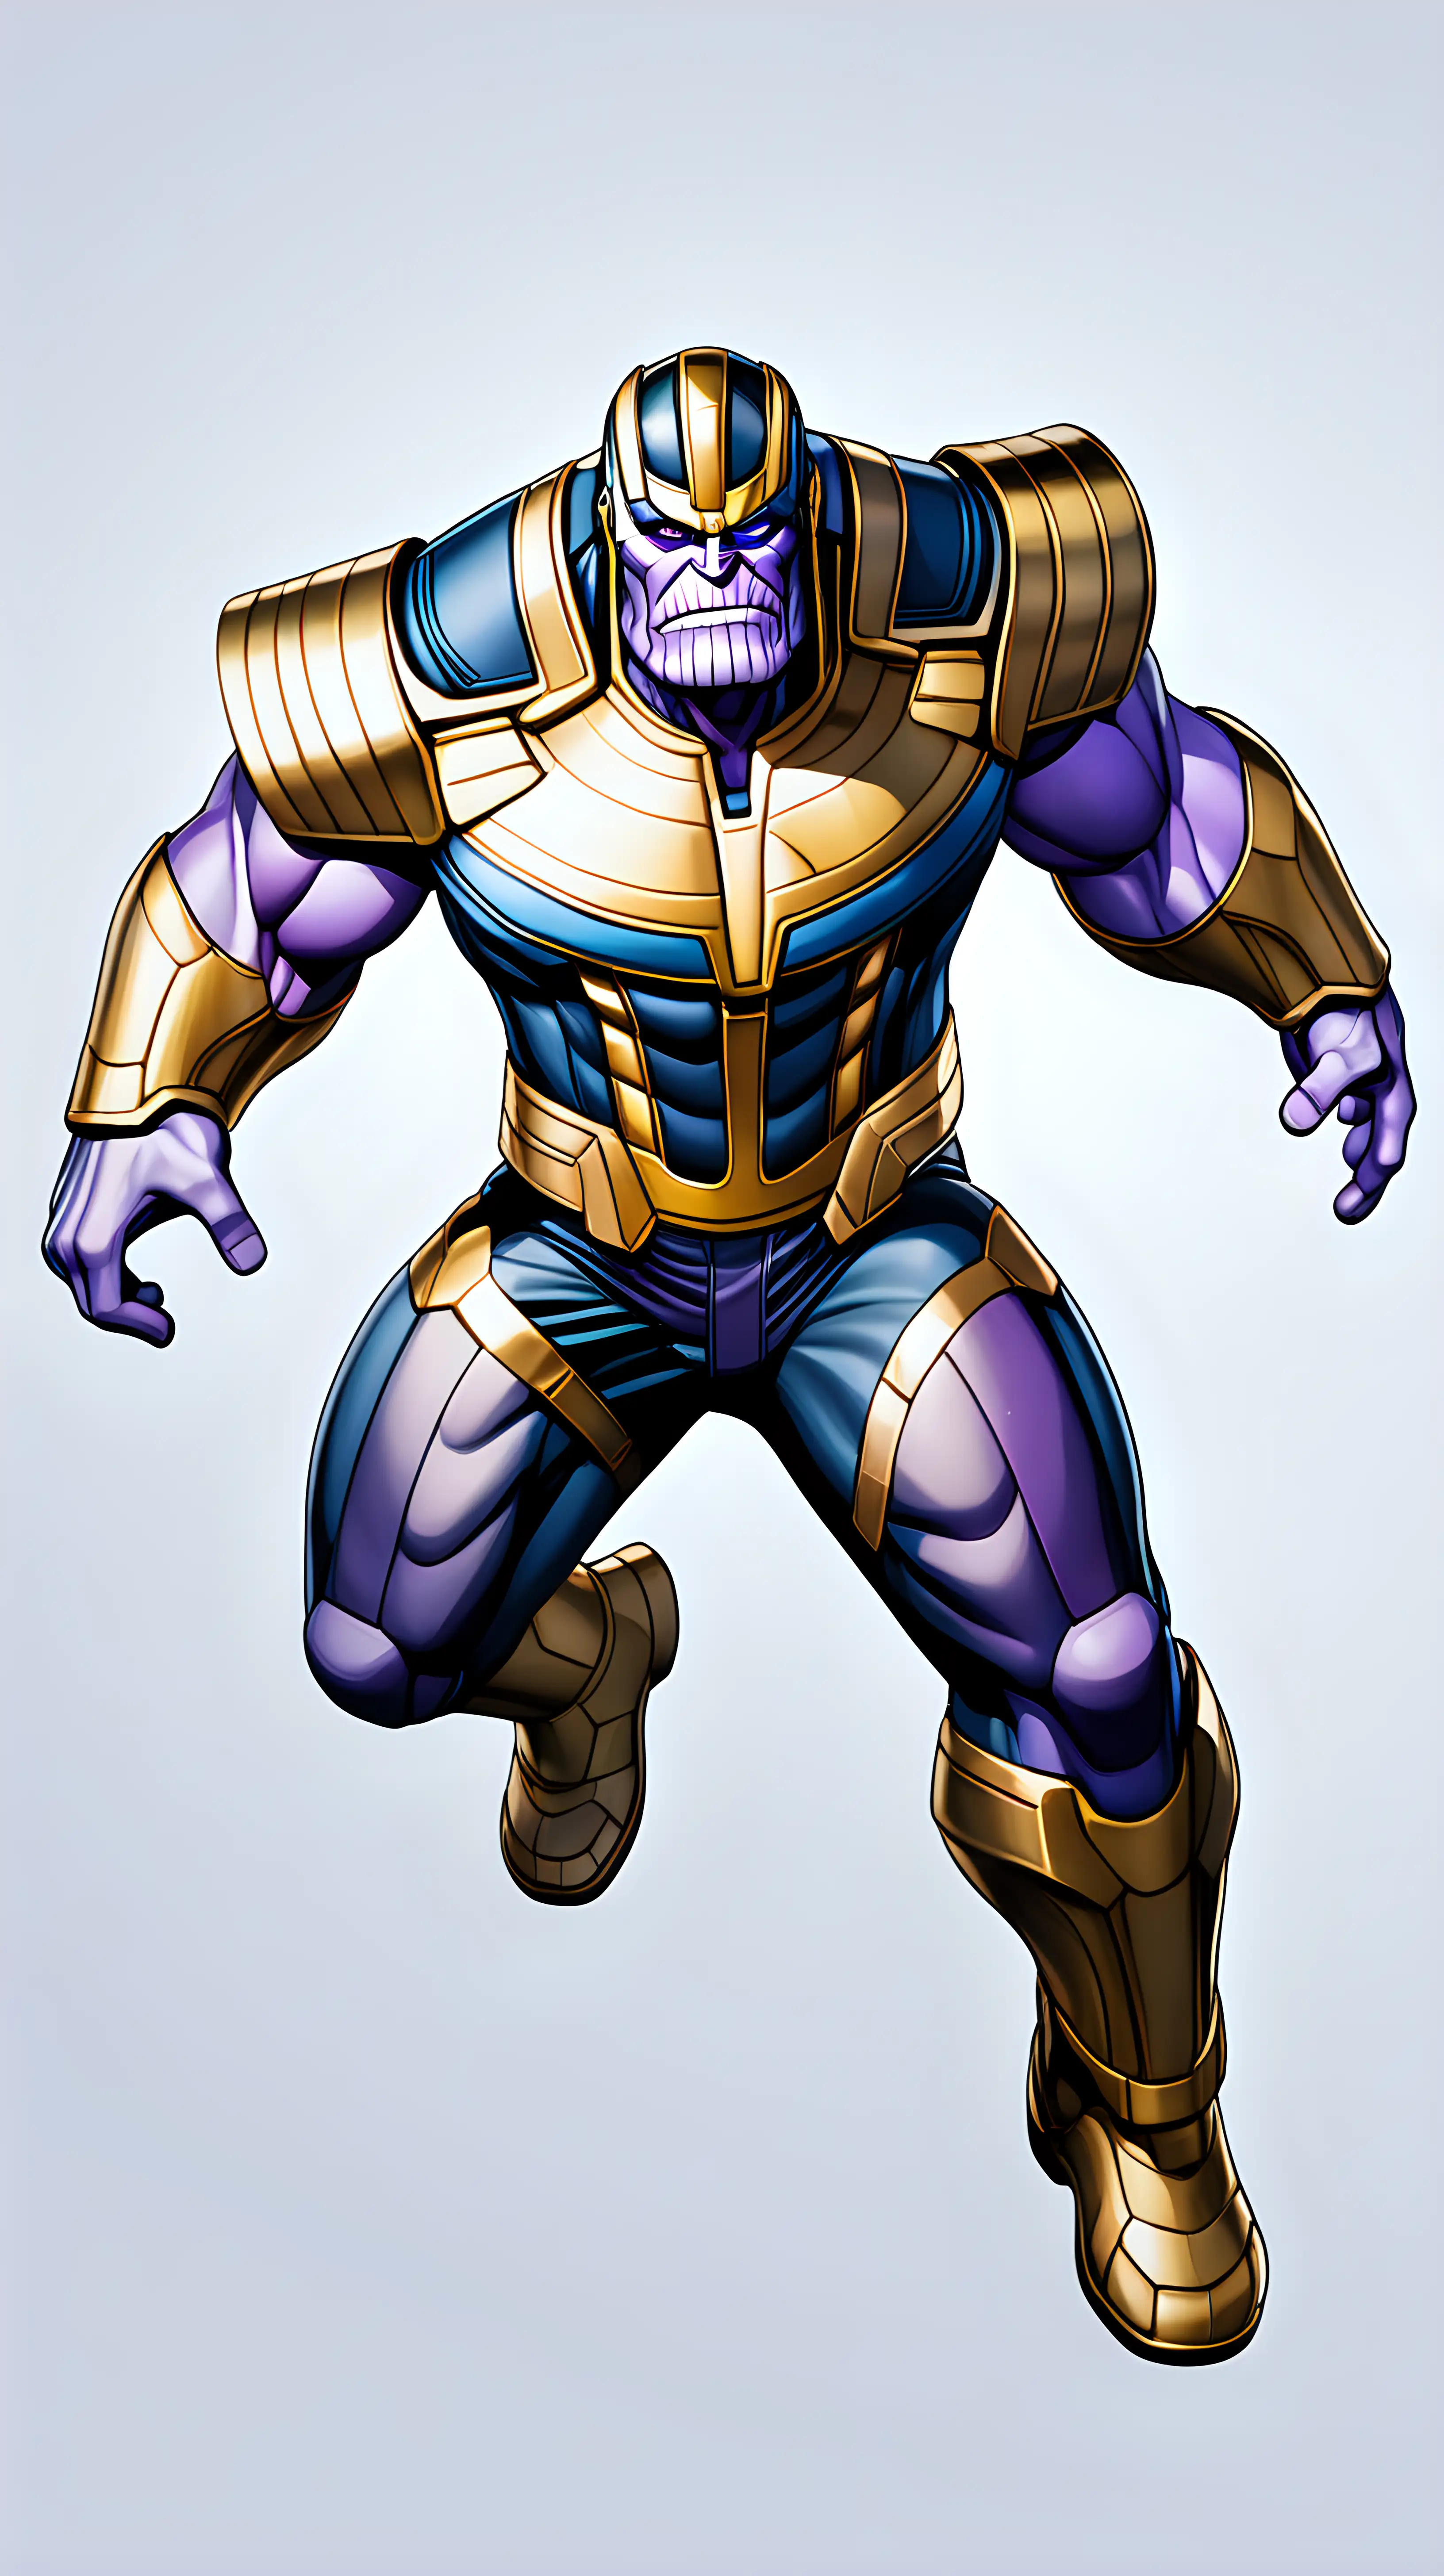 Anime Thanos Floating in the Air Powerful Marvel Villain in Artistic Animation